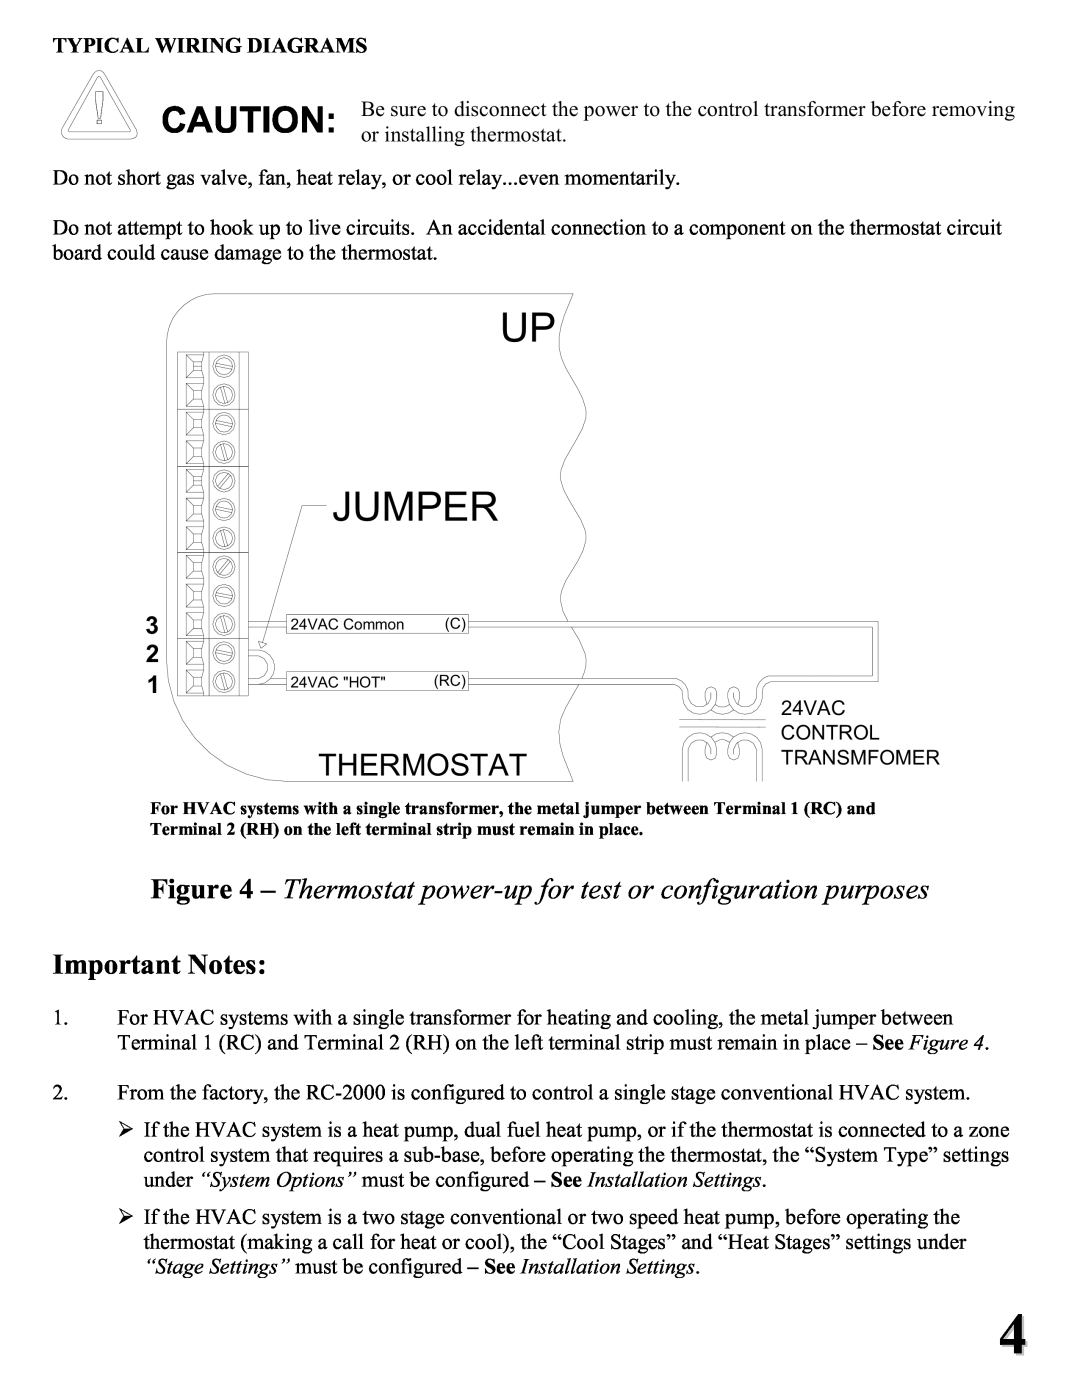 Home Automation RC-2000 installation instructions Jumper, Thermostat, Important Notes 